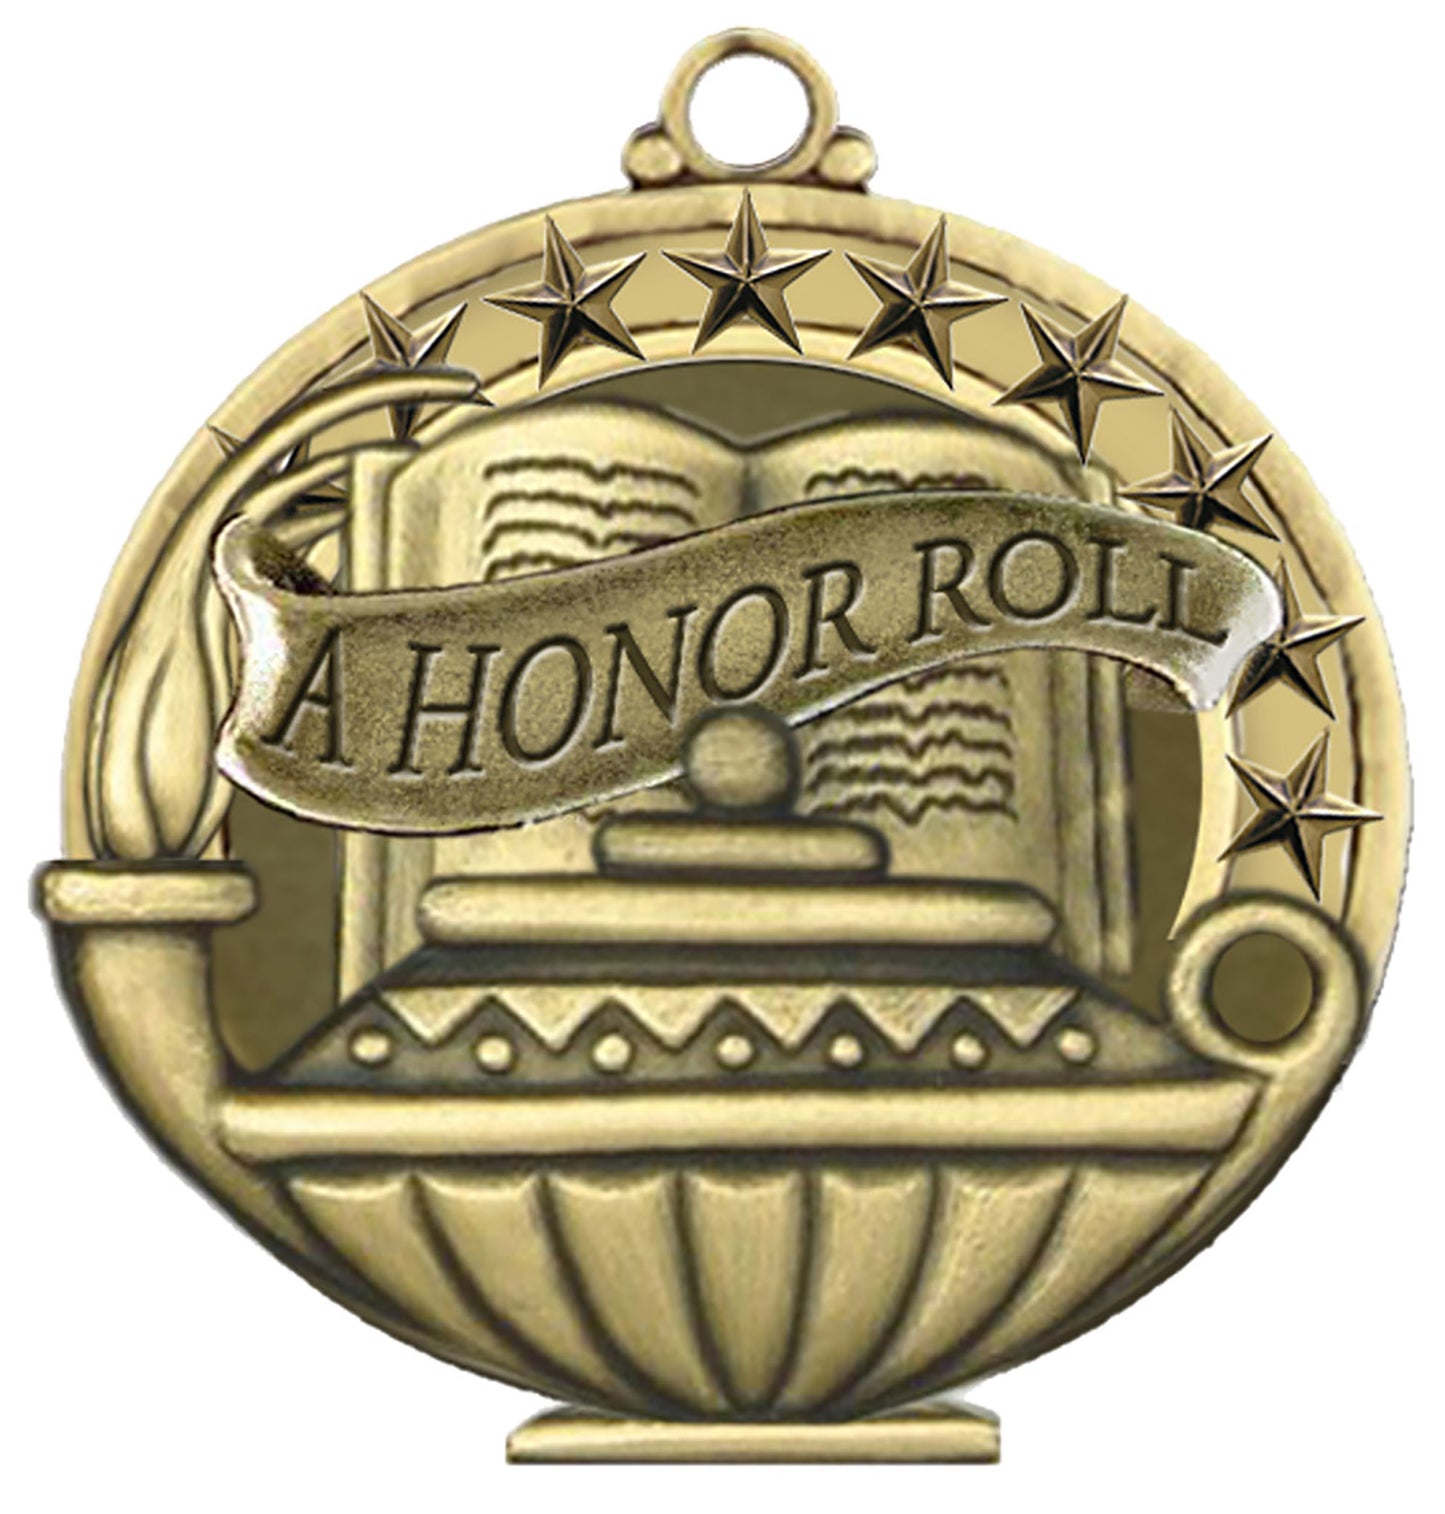 A Honor Roll - Academic Performance Medal